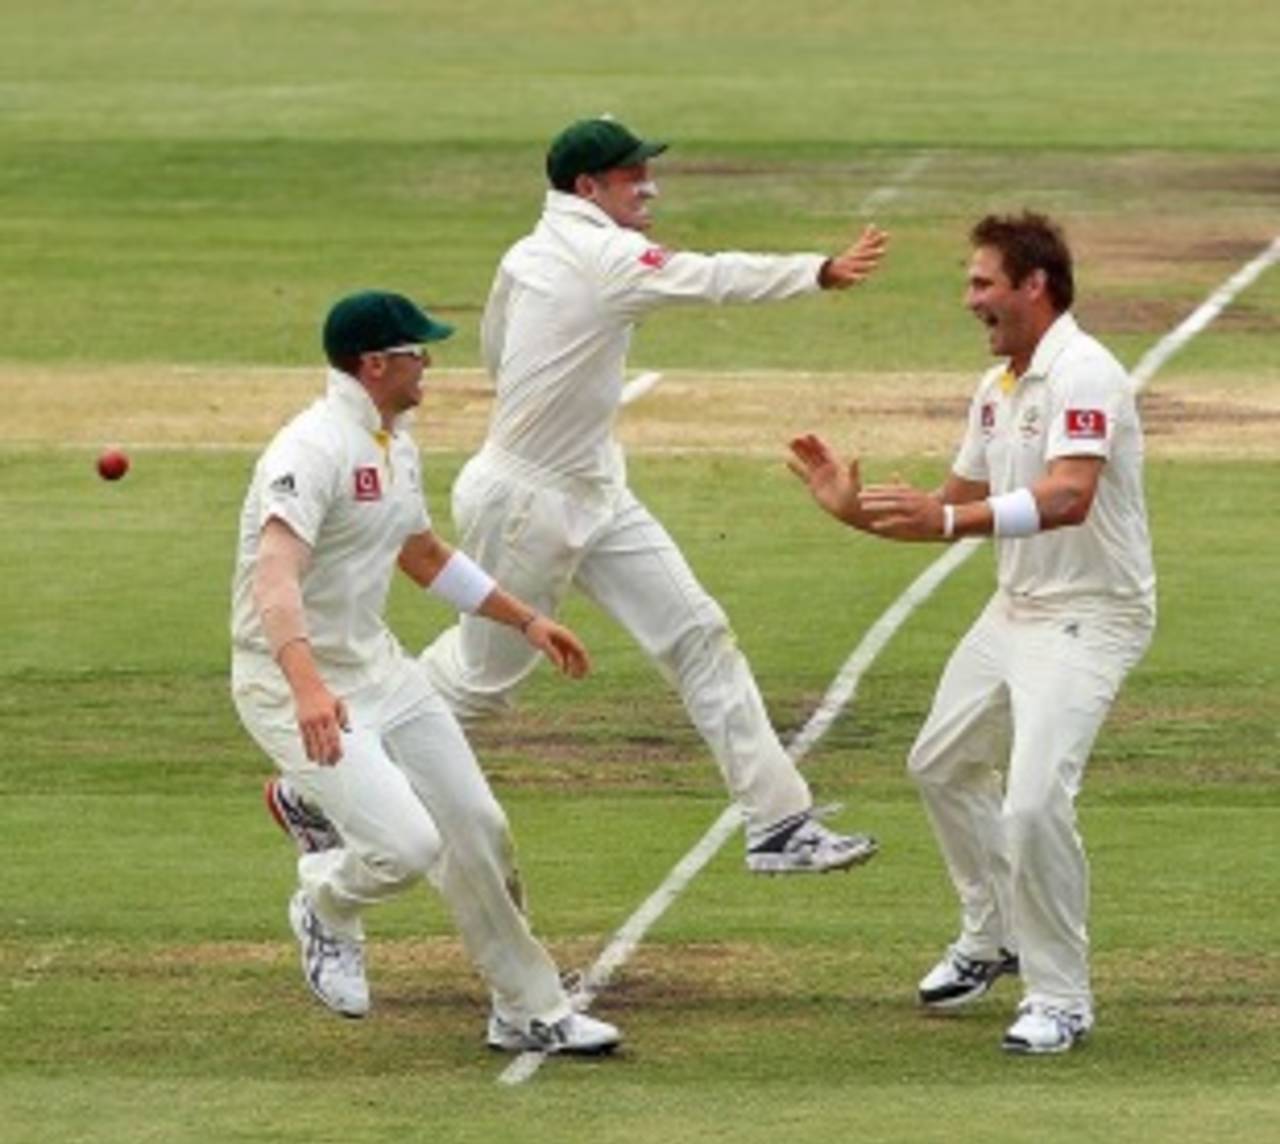 The Australians race towards Ryan Harris after another wicket, Australia v England, 3rd Test, Perth, 4th day, December 19, 2010